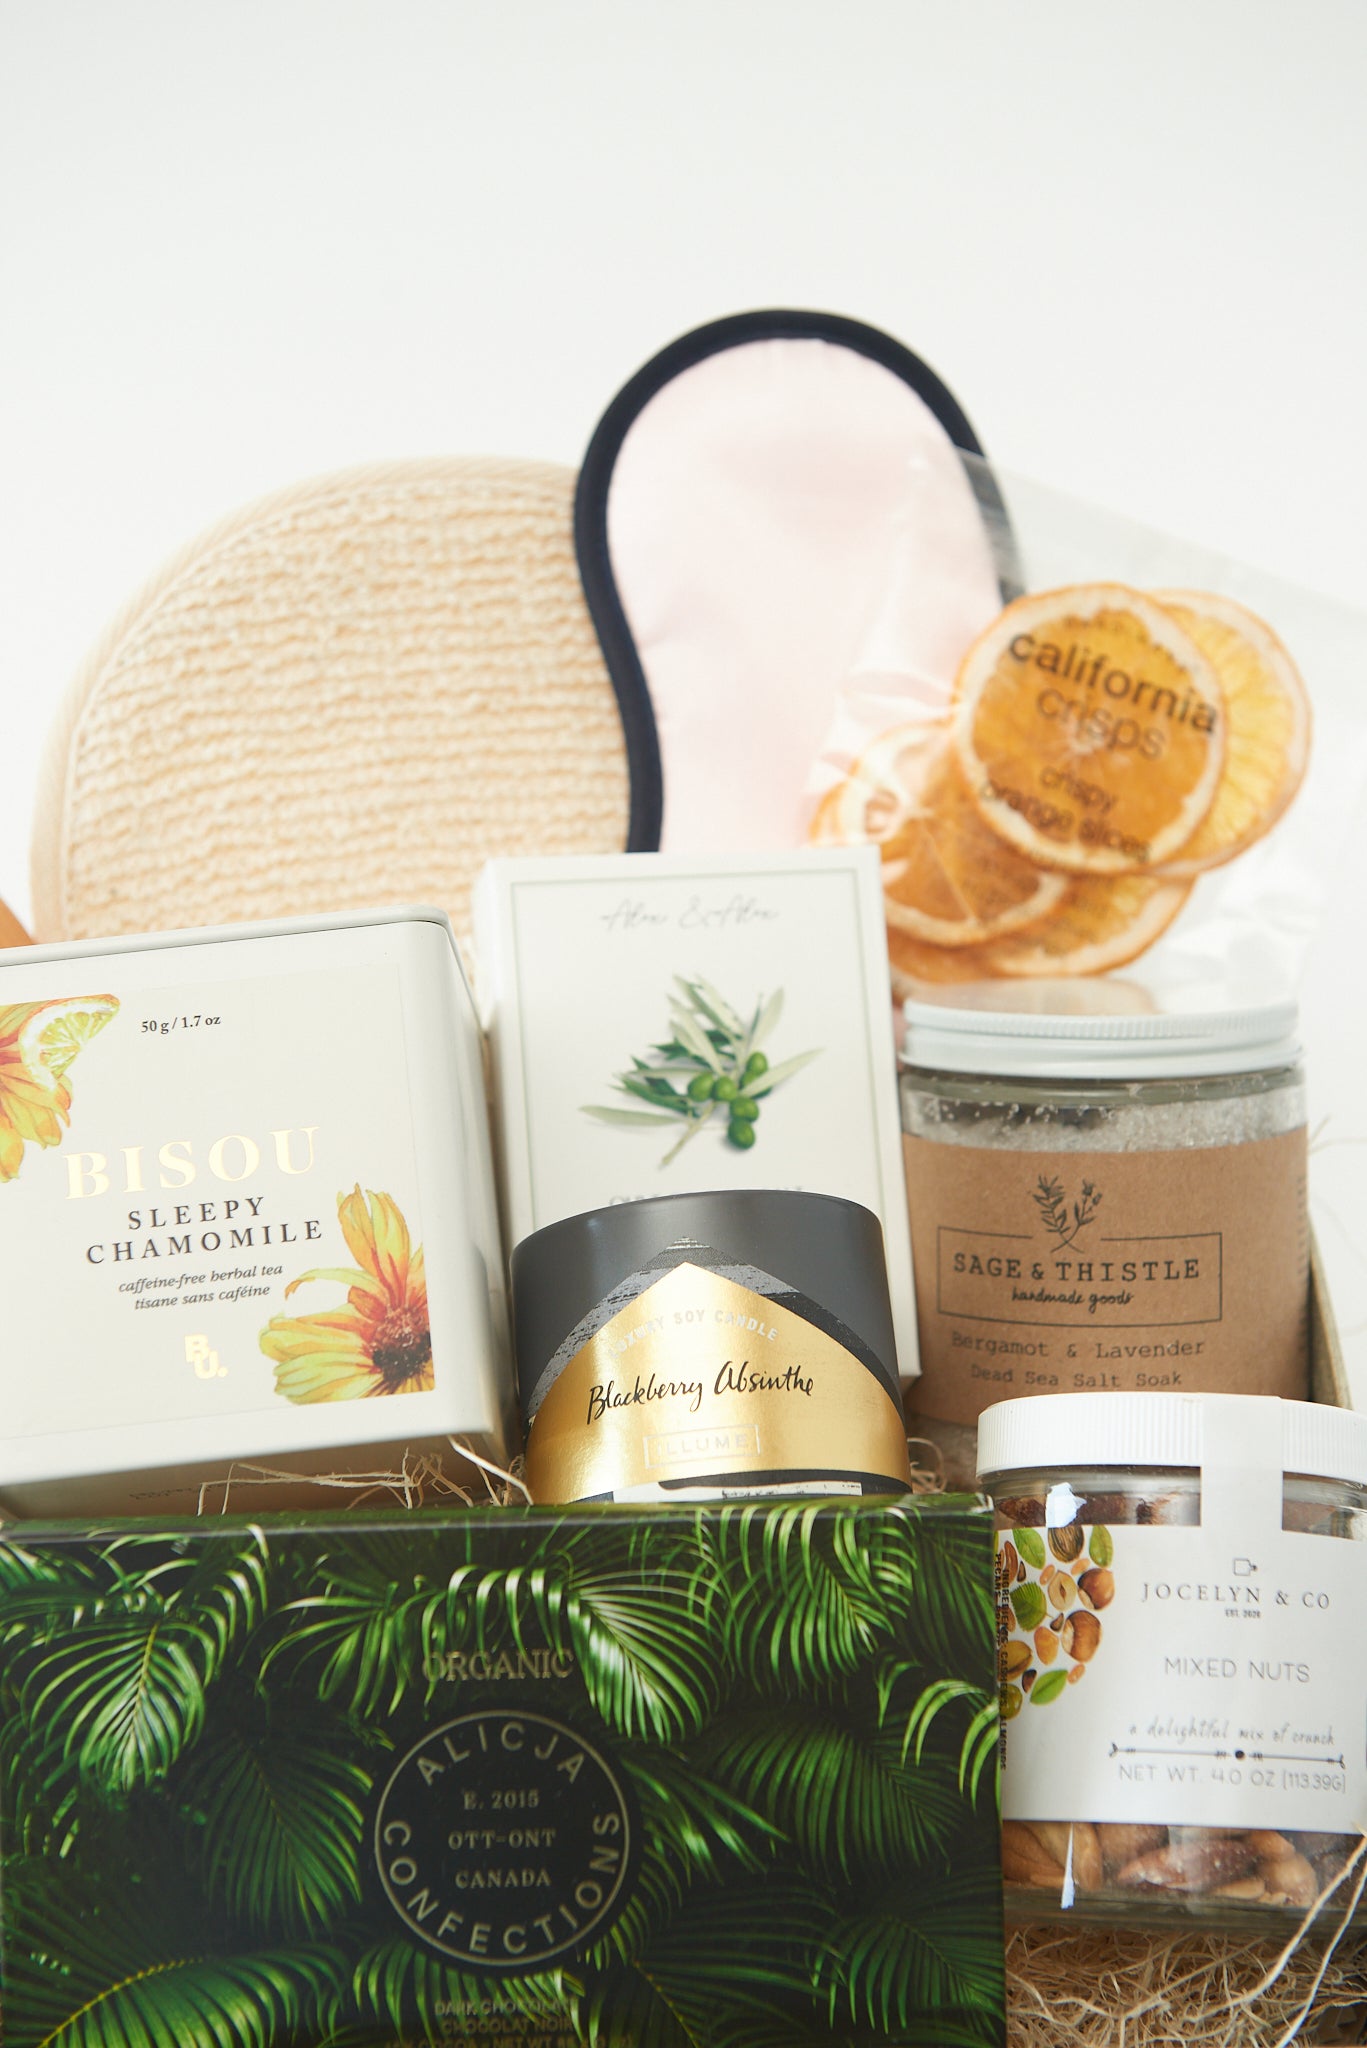 A Spa-tacular Weekend - Madison Gift Co.